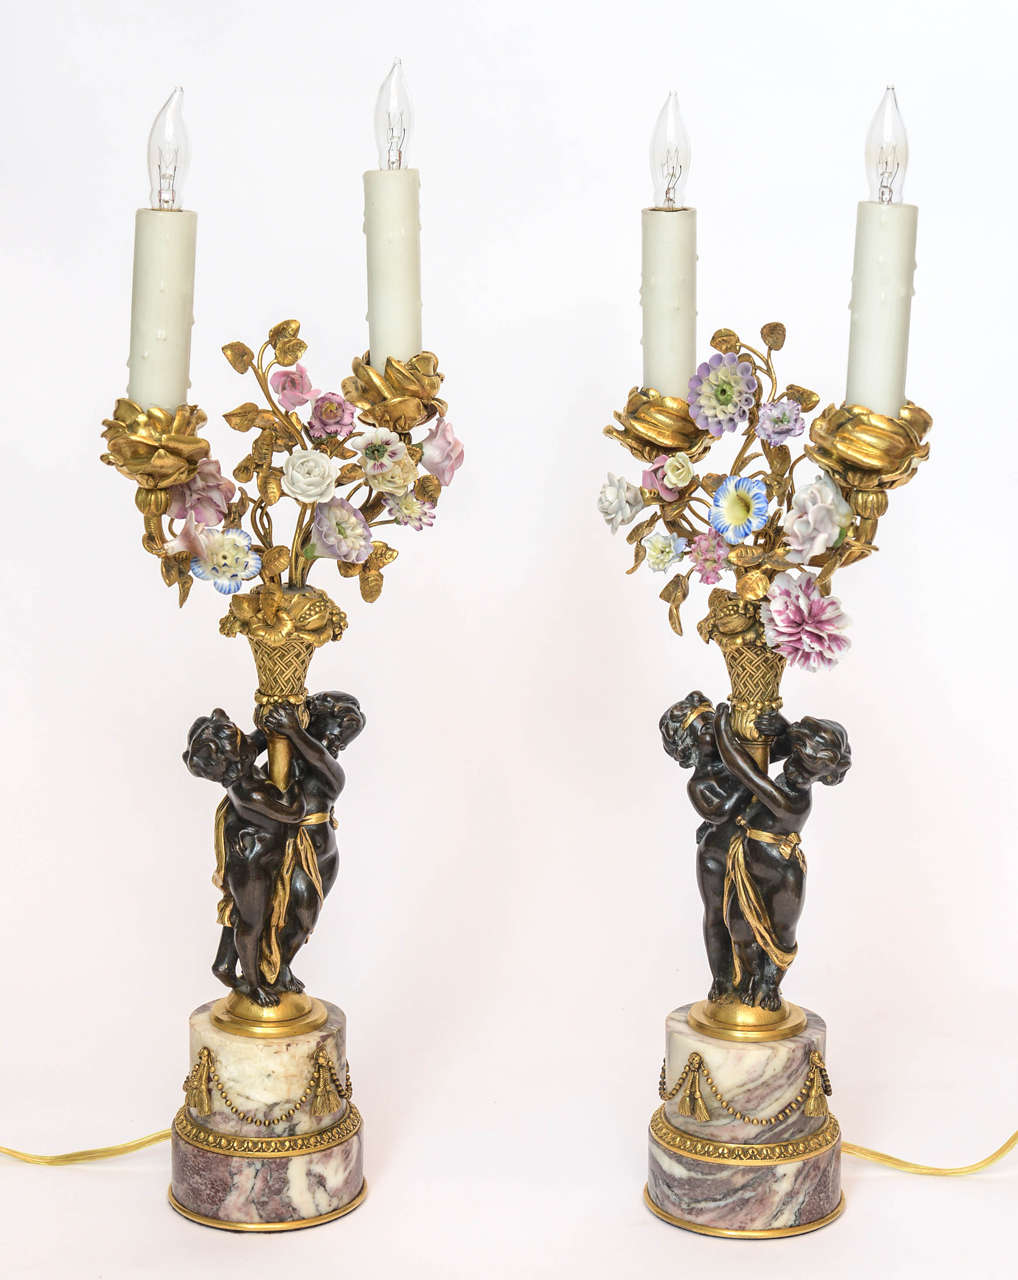 A pair of candelabra mounted on rouge marble with two children holding a flower basket and flowers, by E.F. Caldwell, circa 1900. Height - 16